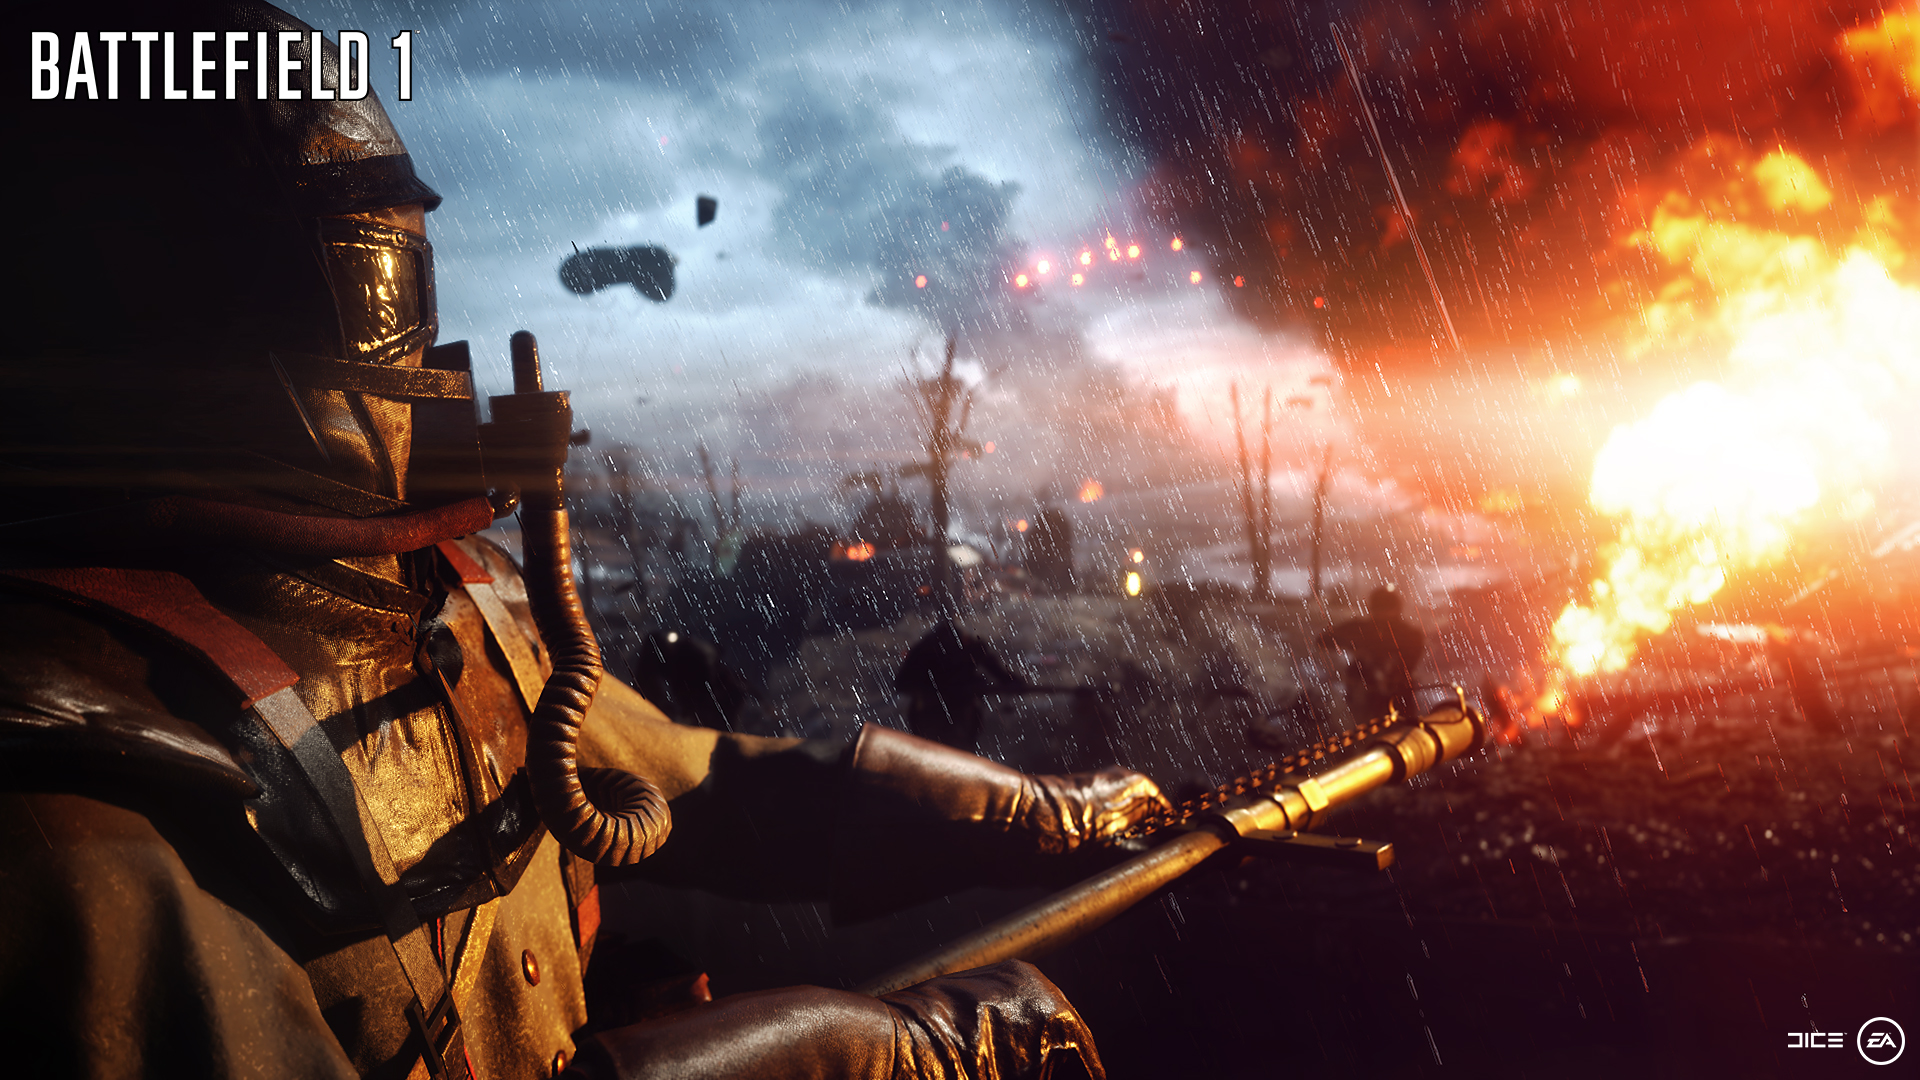 Battlefield 1 players cease fire to observe 100th anniversary of WWI  armistice - Polygon